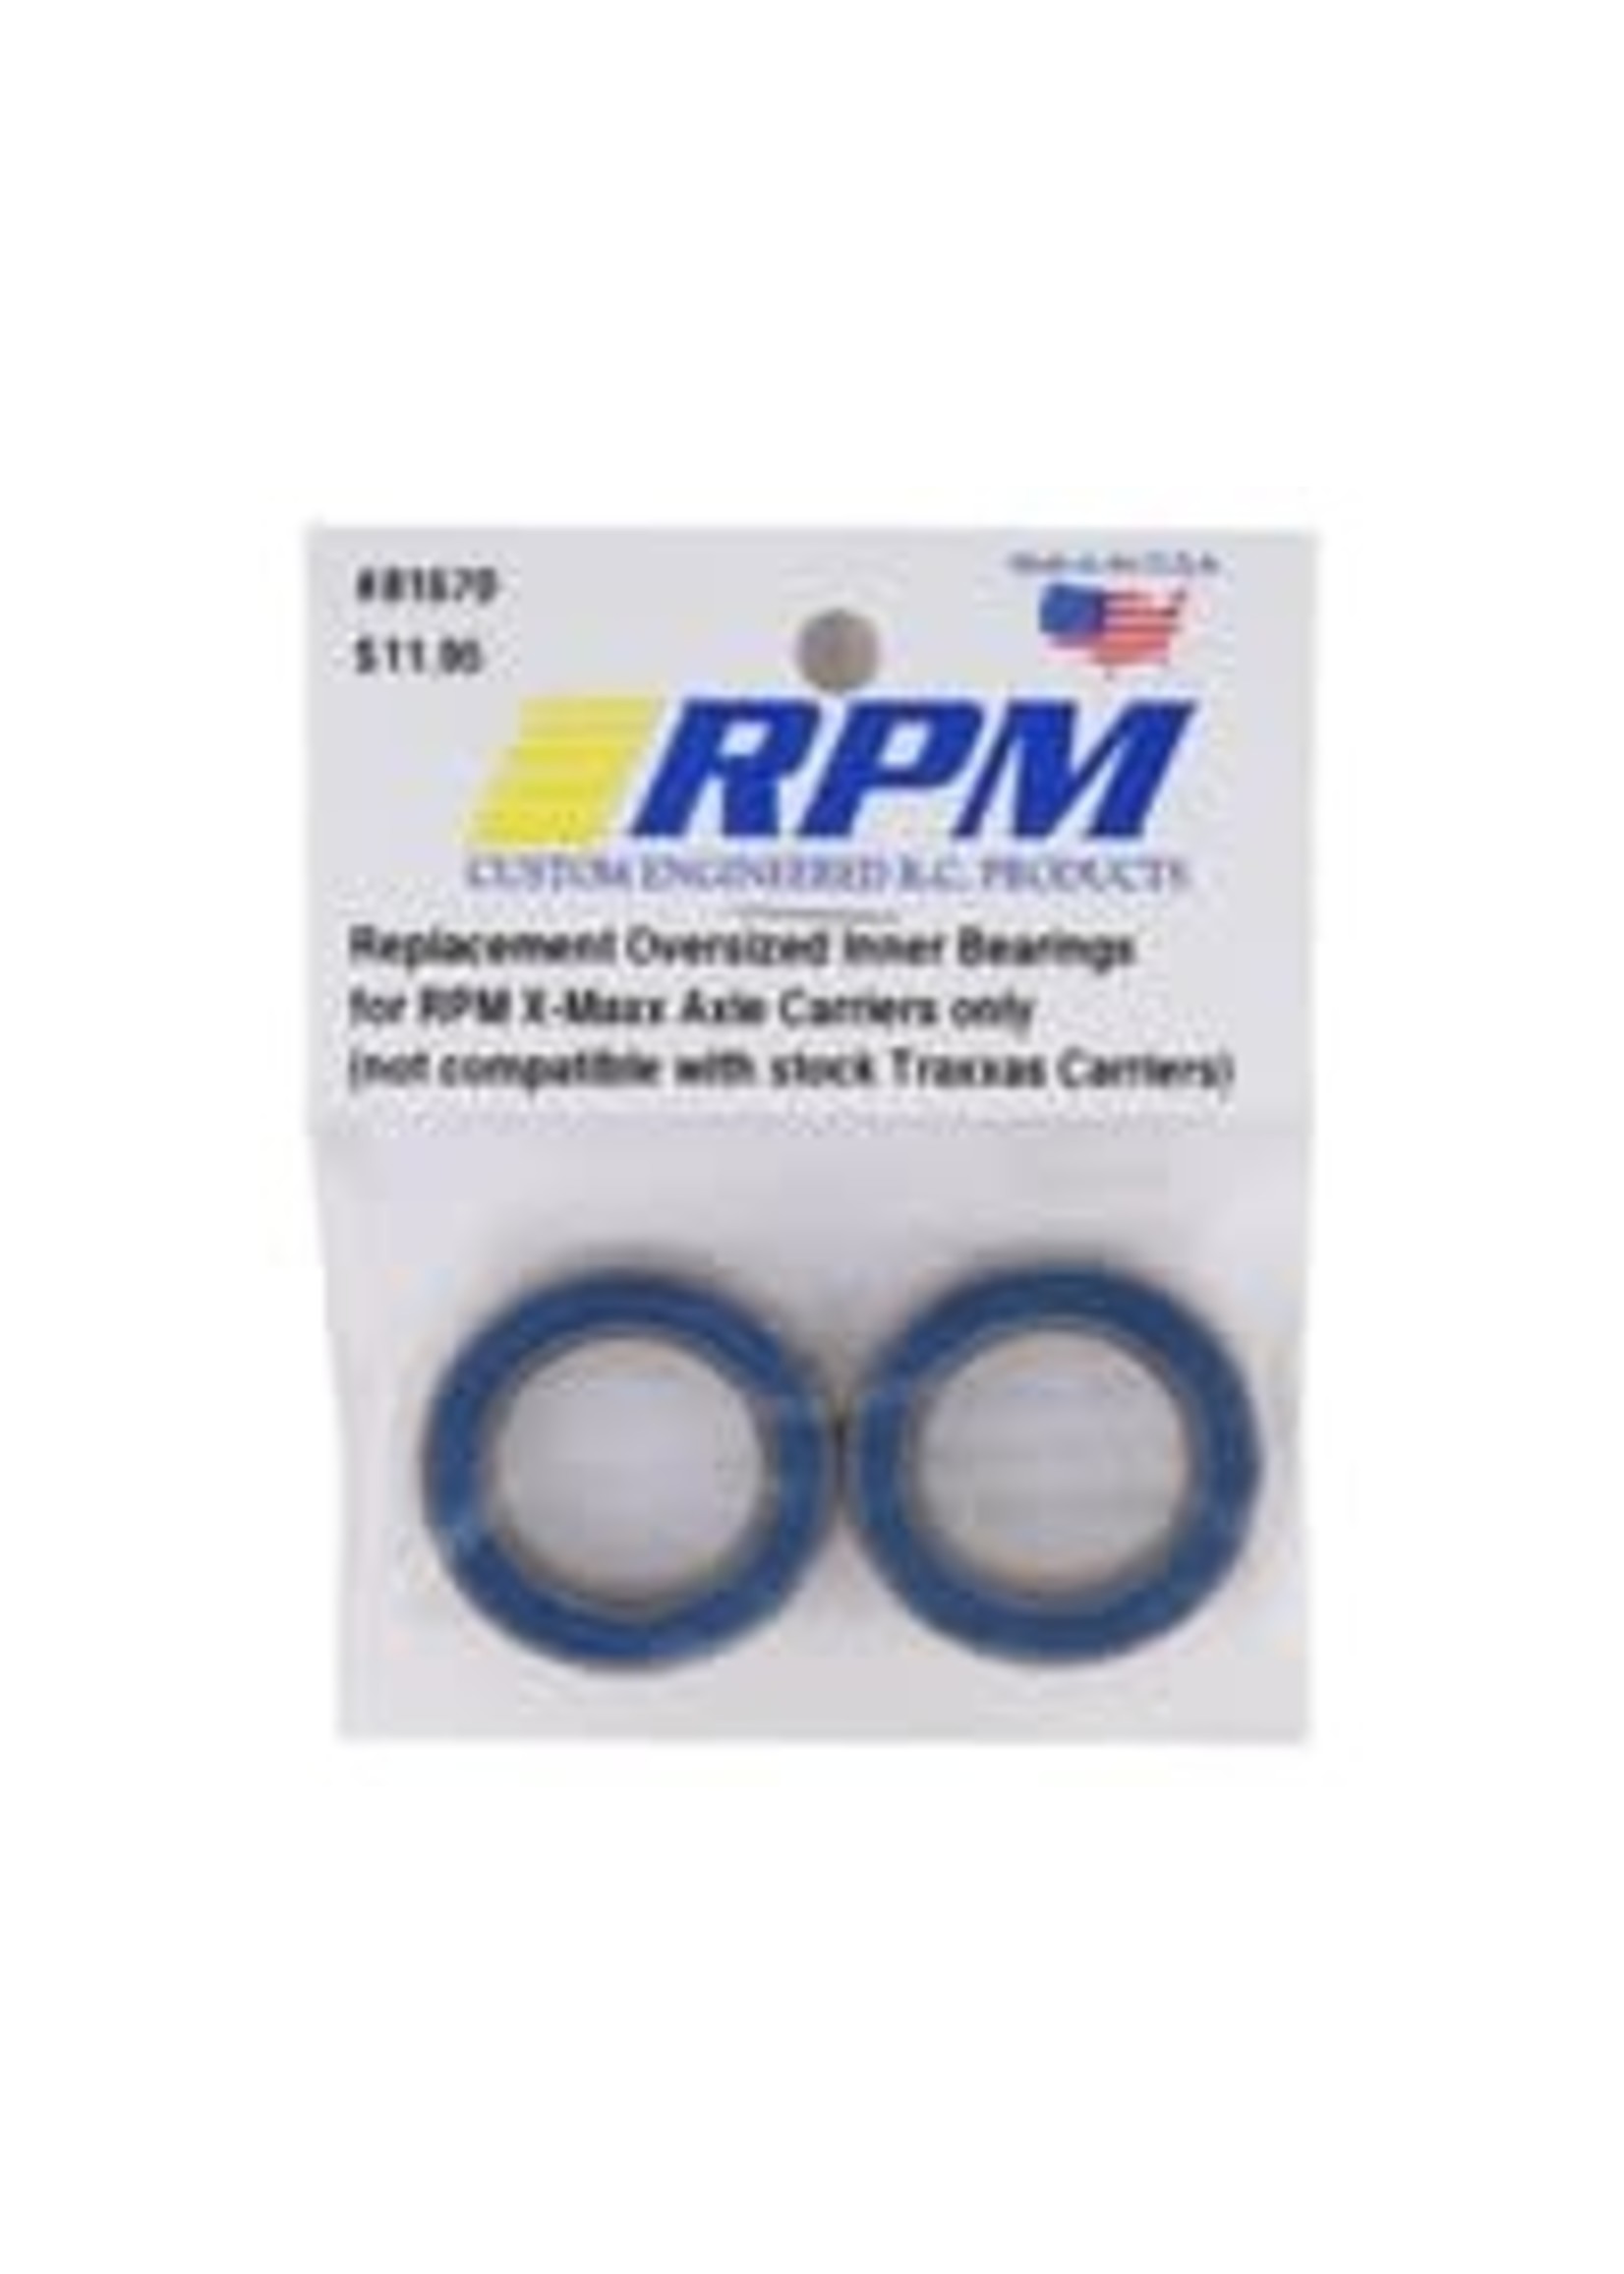 RPM RPM81670 Replacement Oversized Inner Bearing:R Carriers